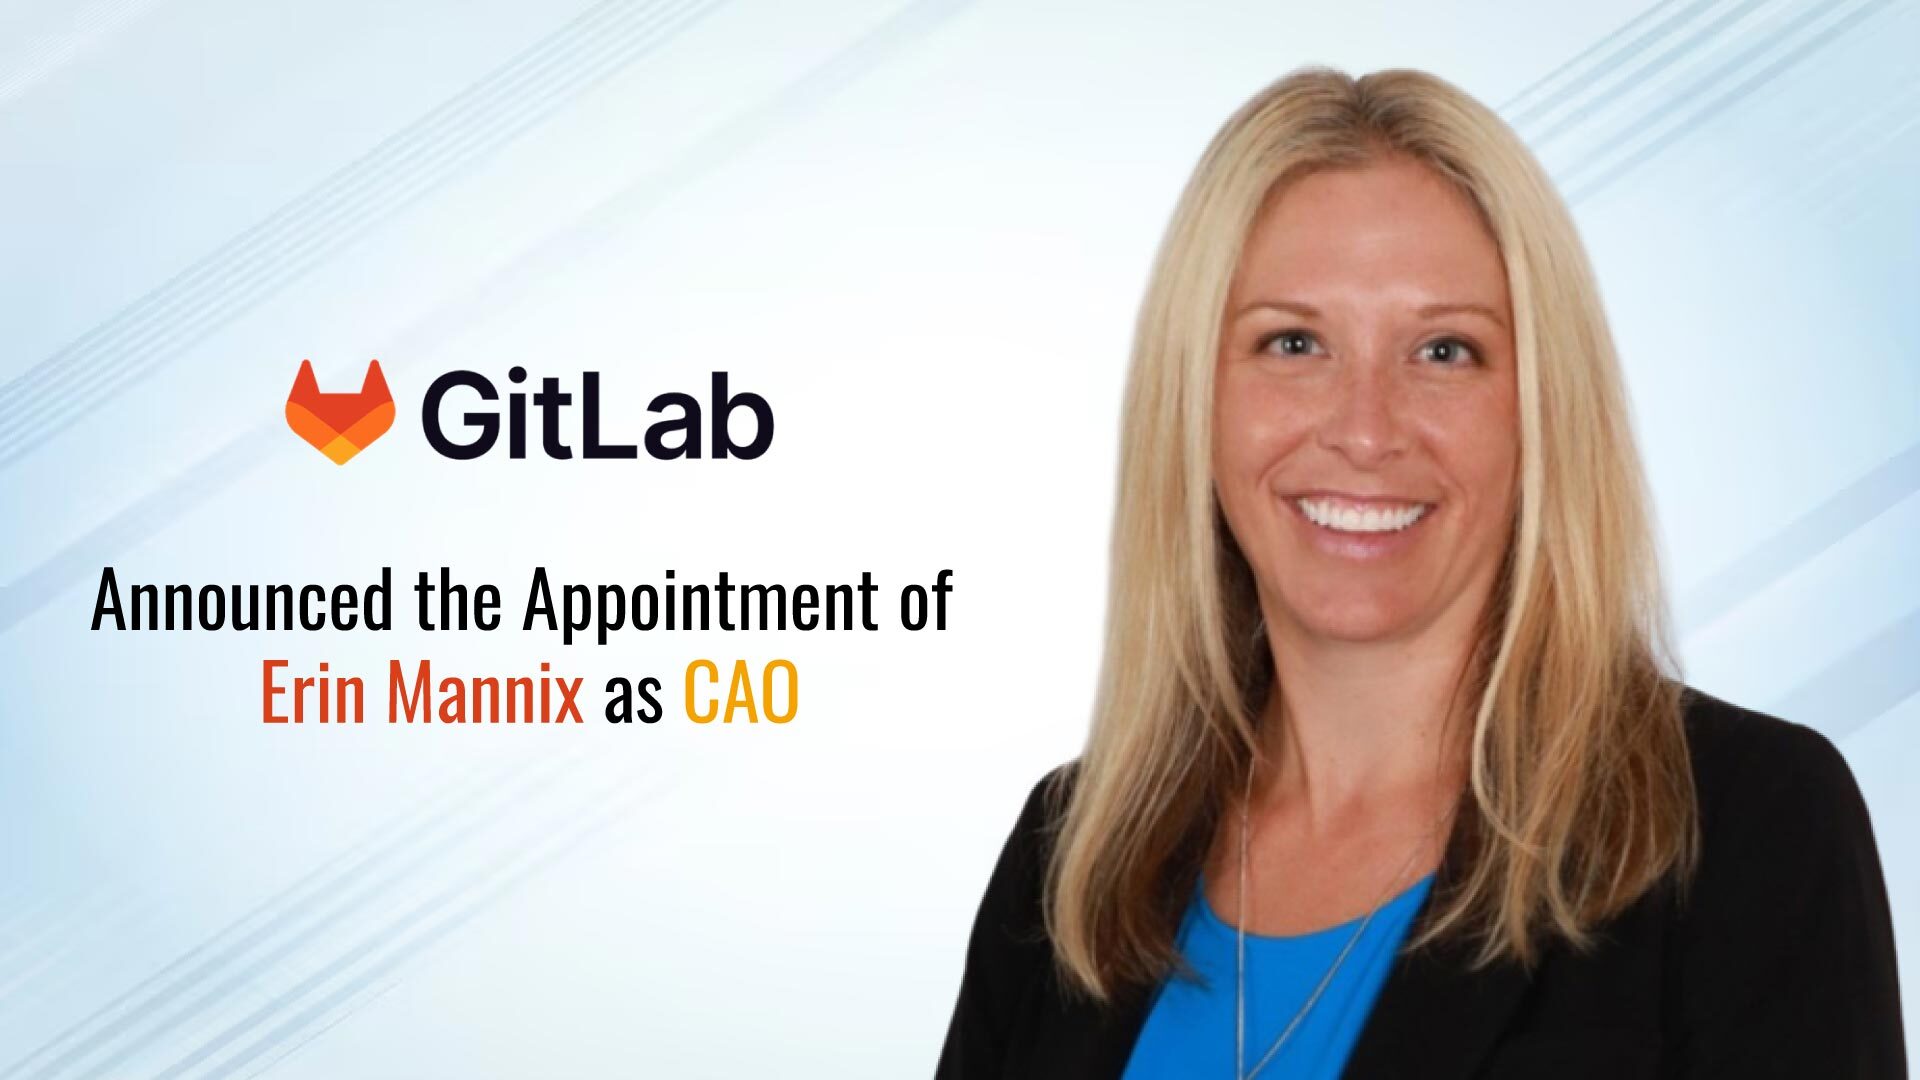 GitLab Appoints Erin Mannix as Chief Accounting Officer